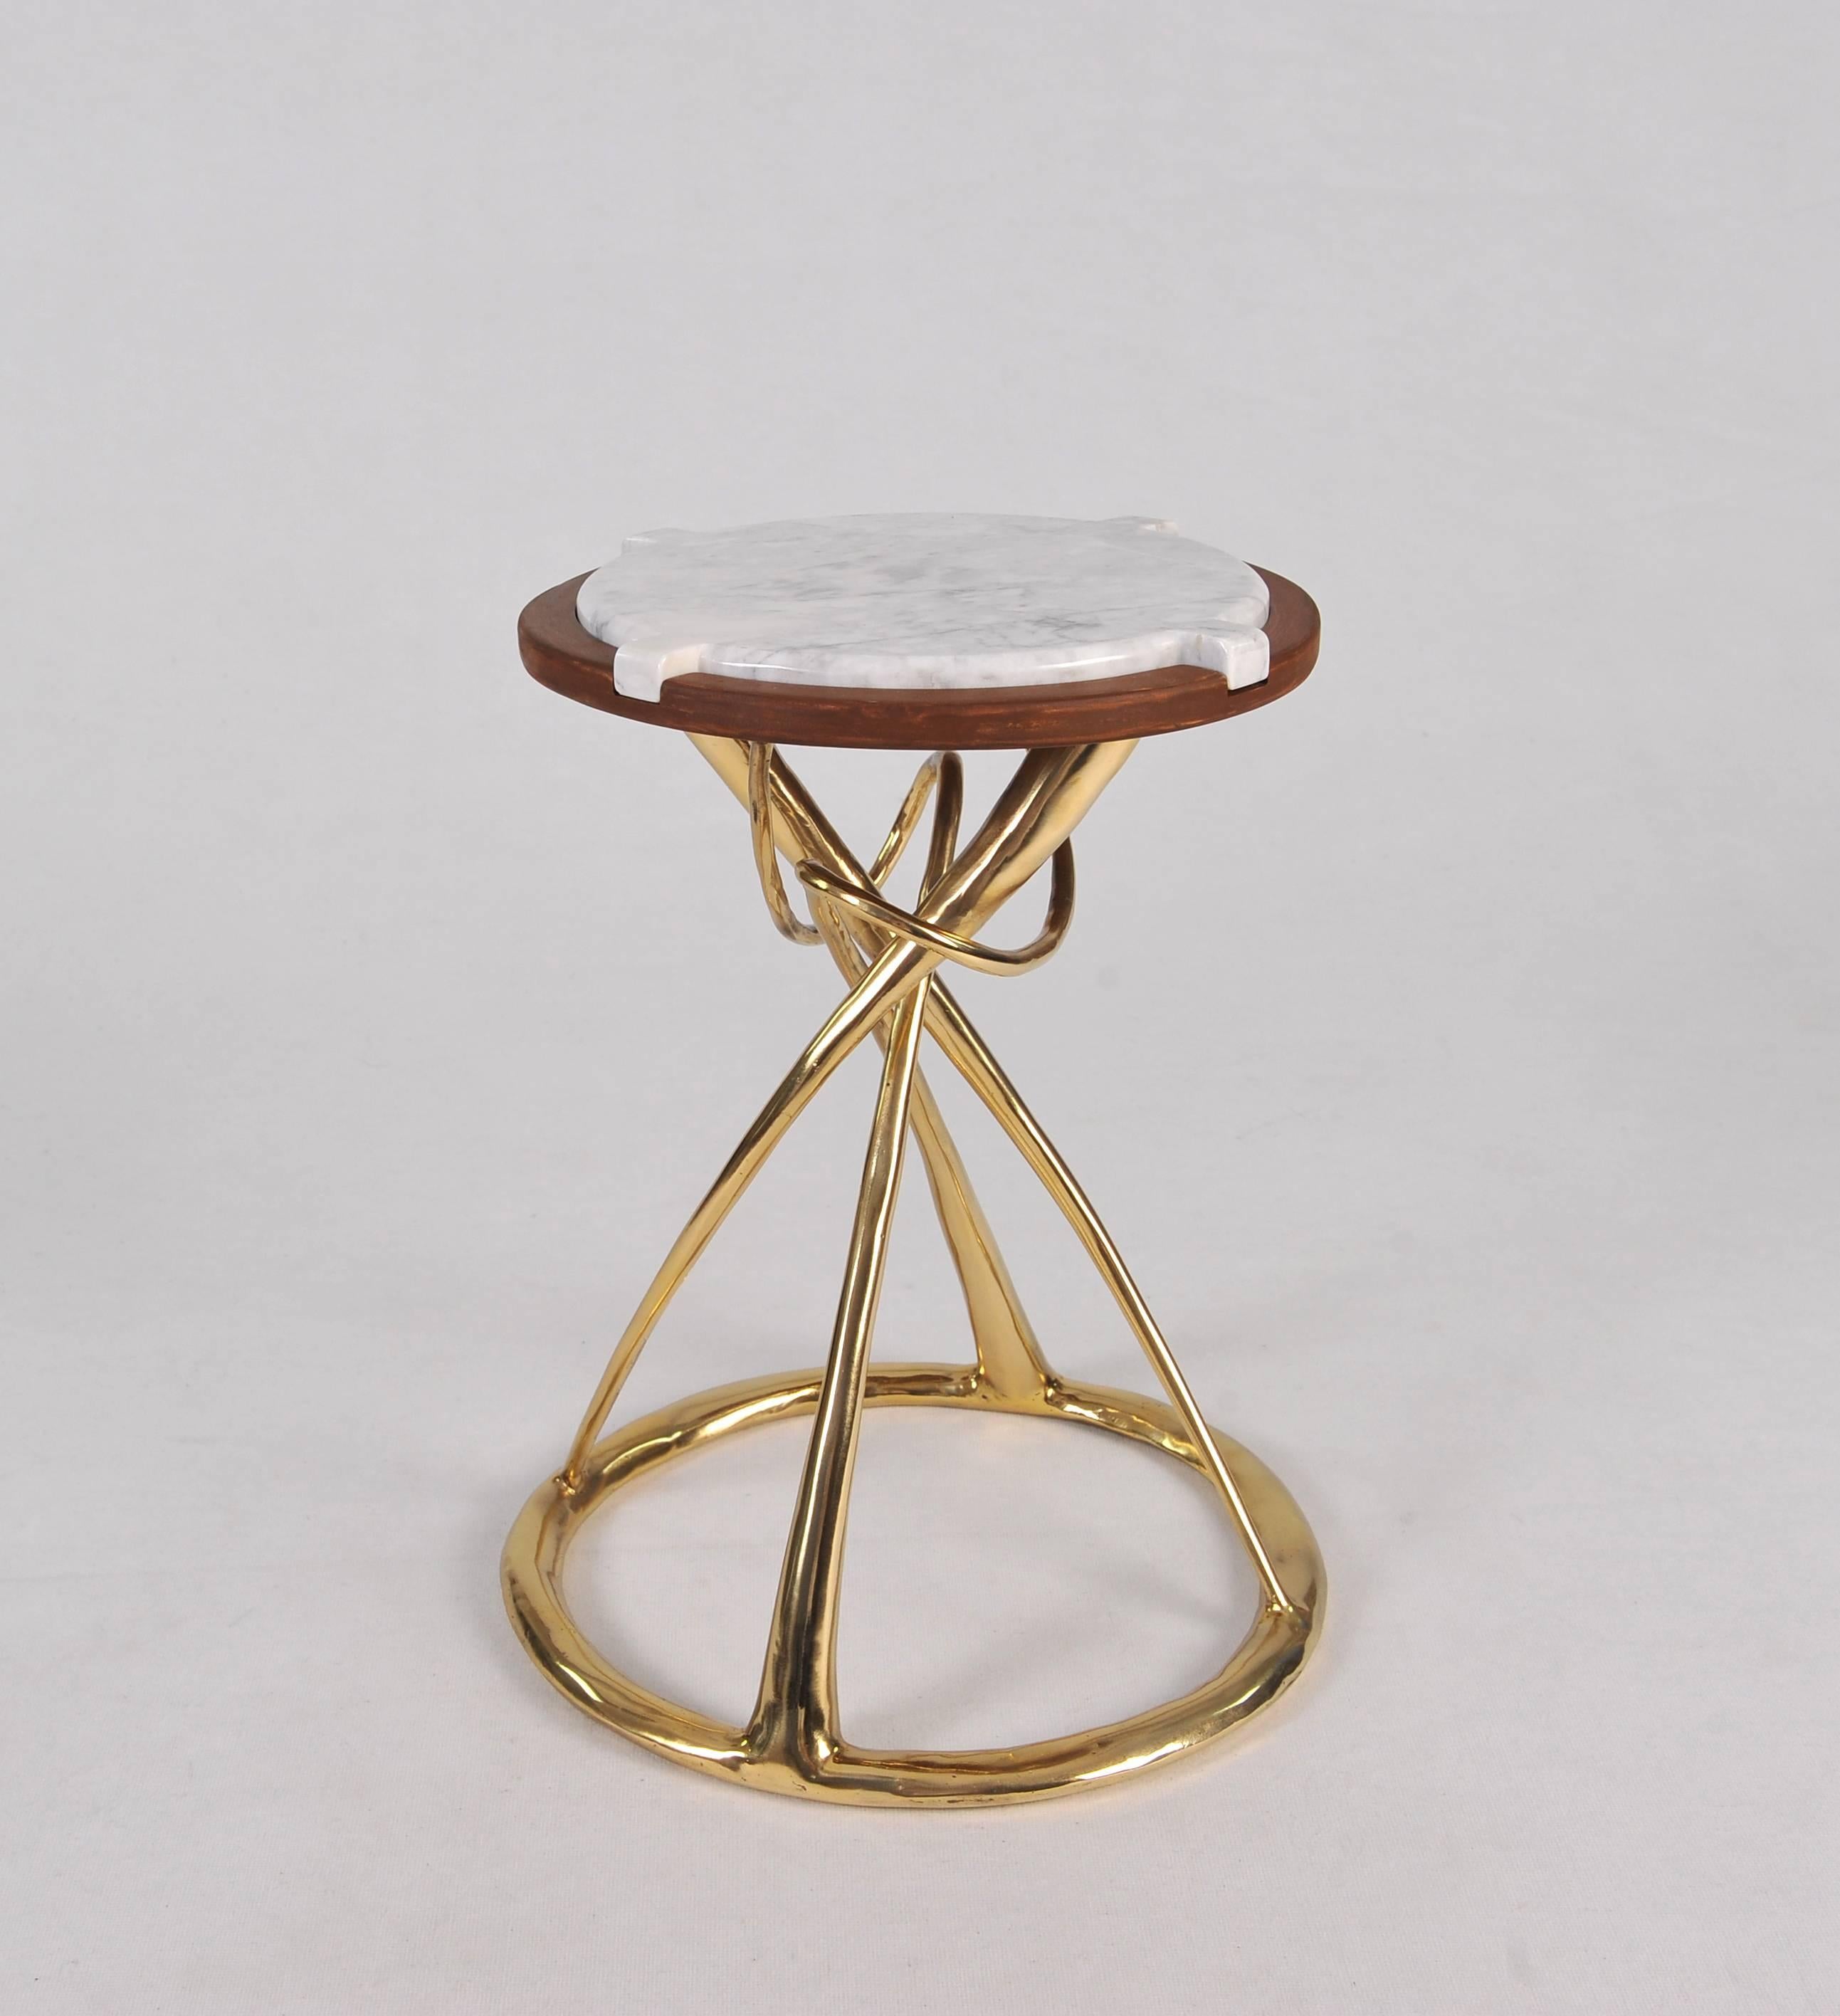 Pair of brass side tables, hourglass by Misaya
Dimensions: H.49 x W.35 x L.35 cm
Handsculpted brass and marble tables.